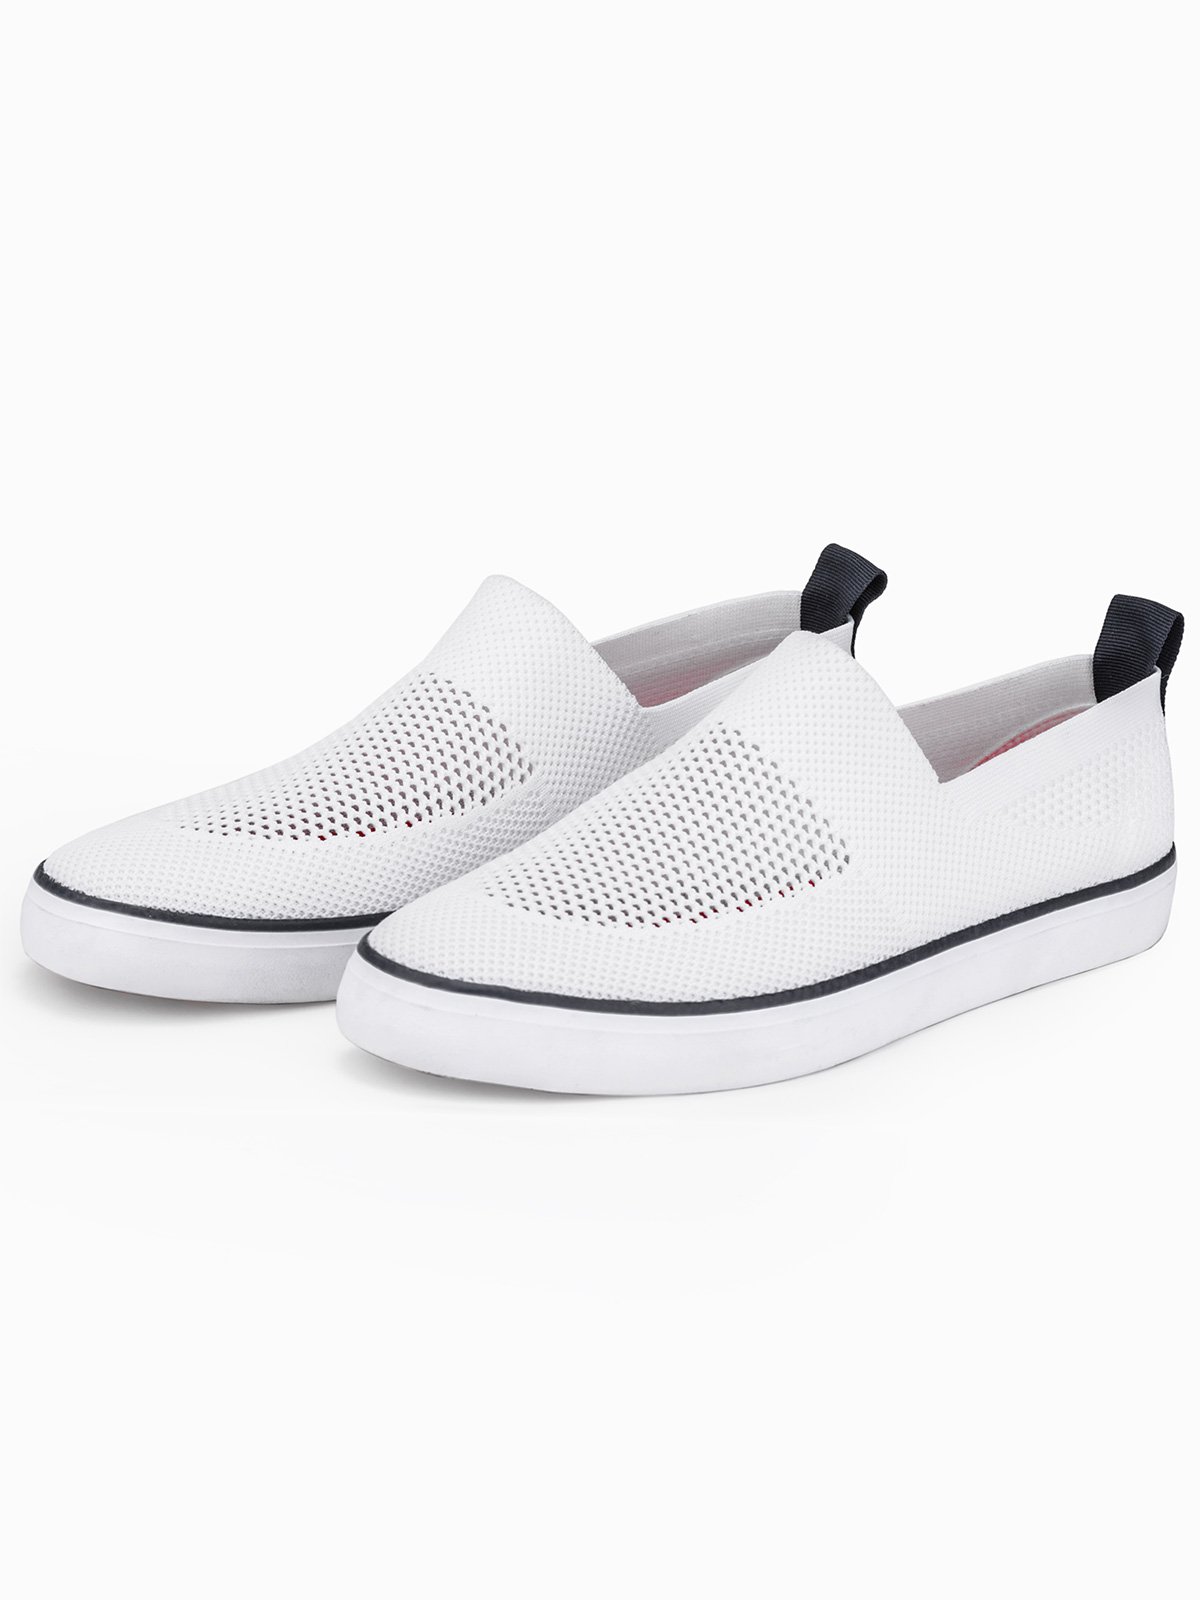 mens white dress trainers